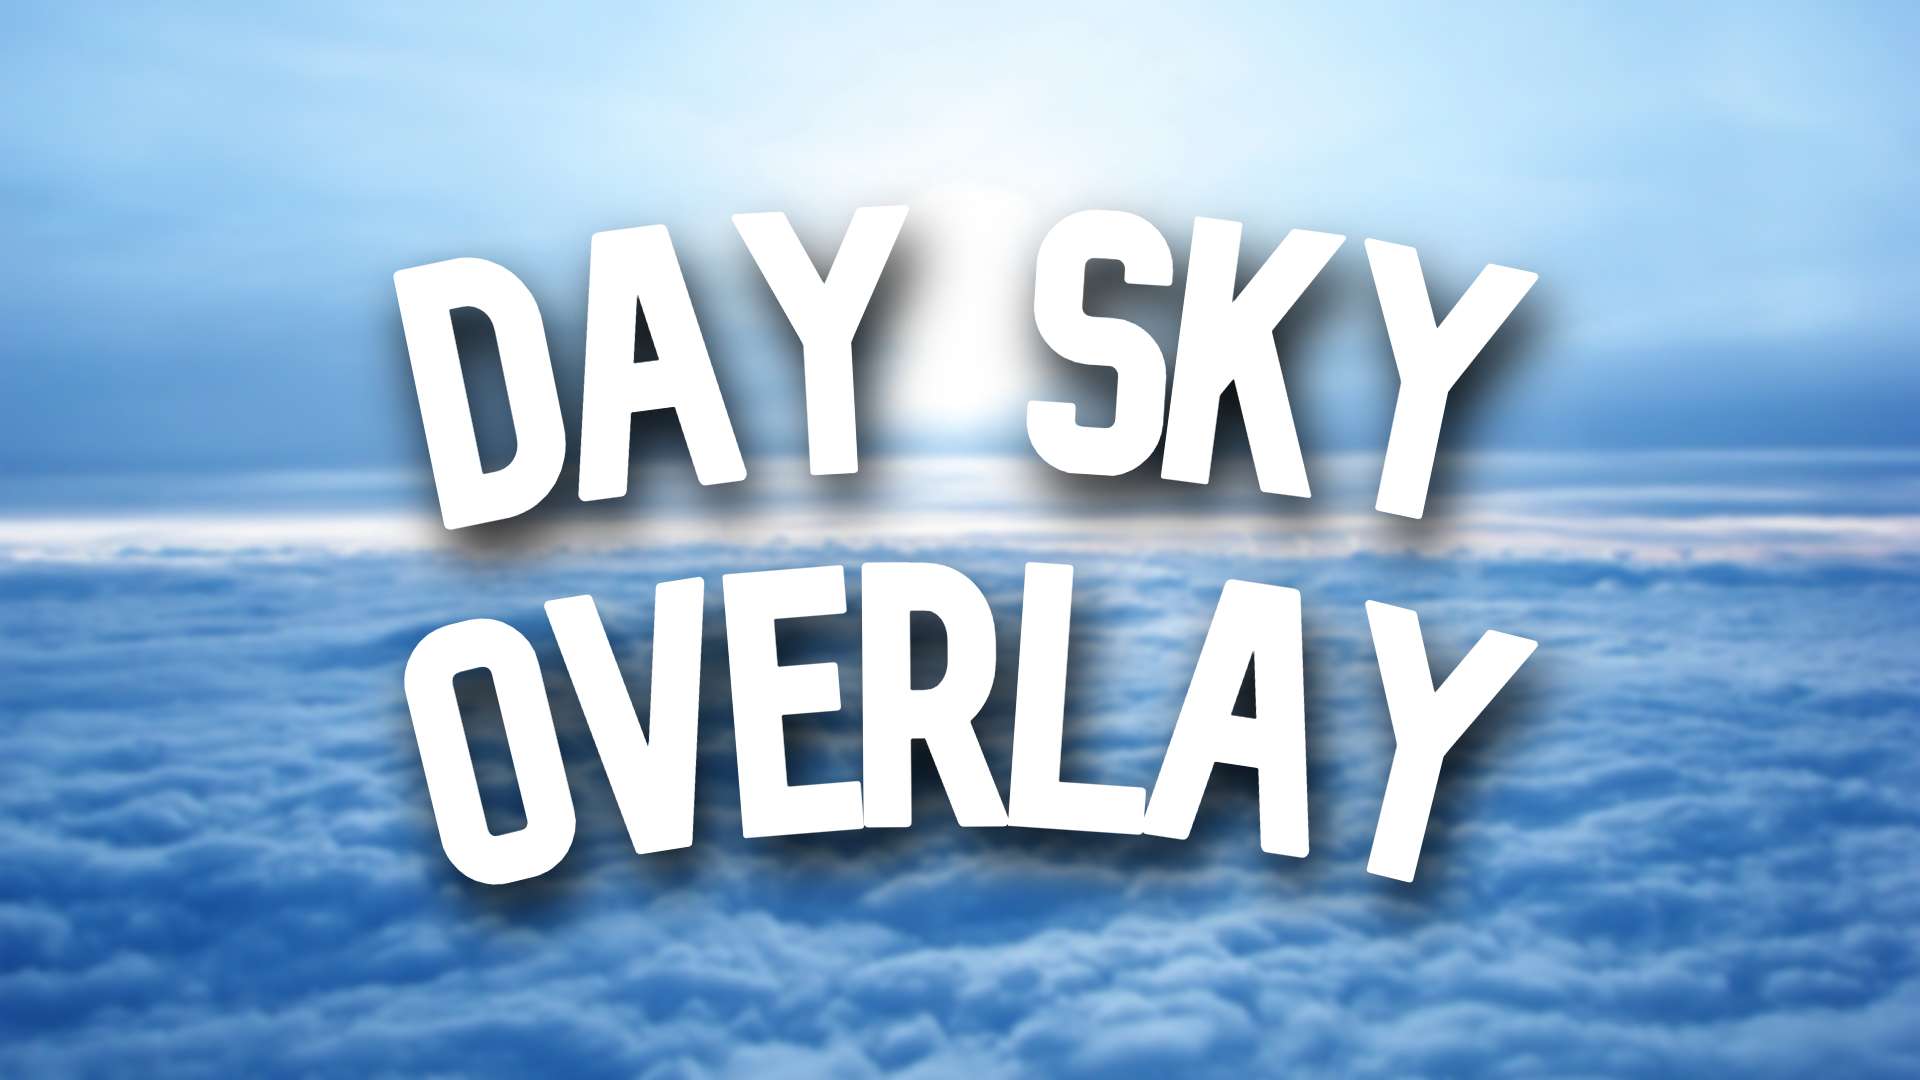 Day Sky Overlay #14 16x by rh56 on PvPRP